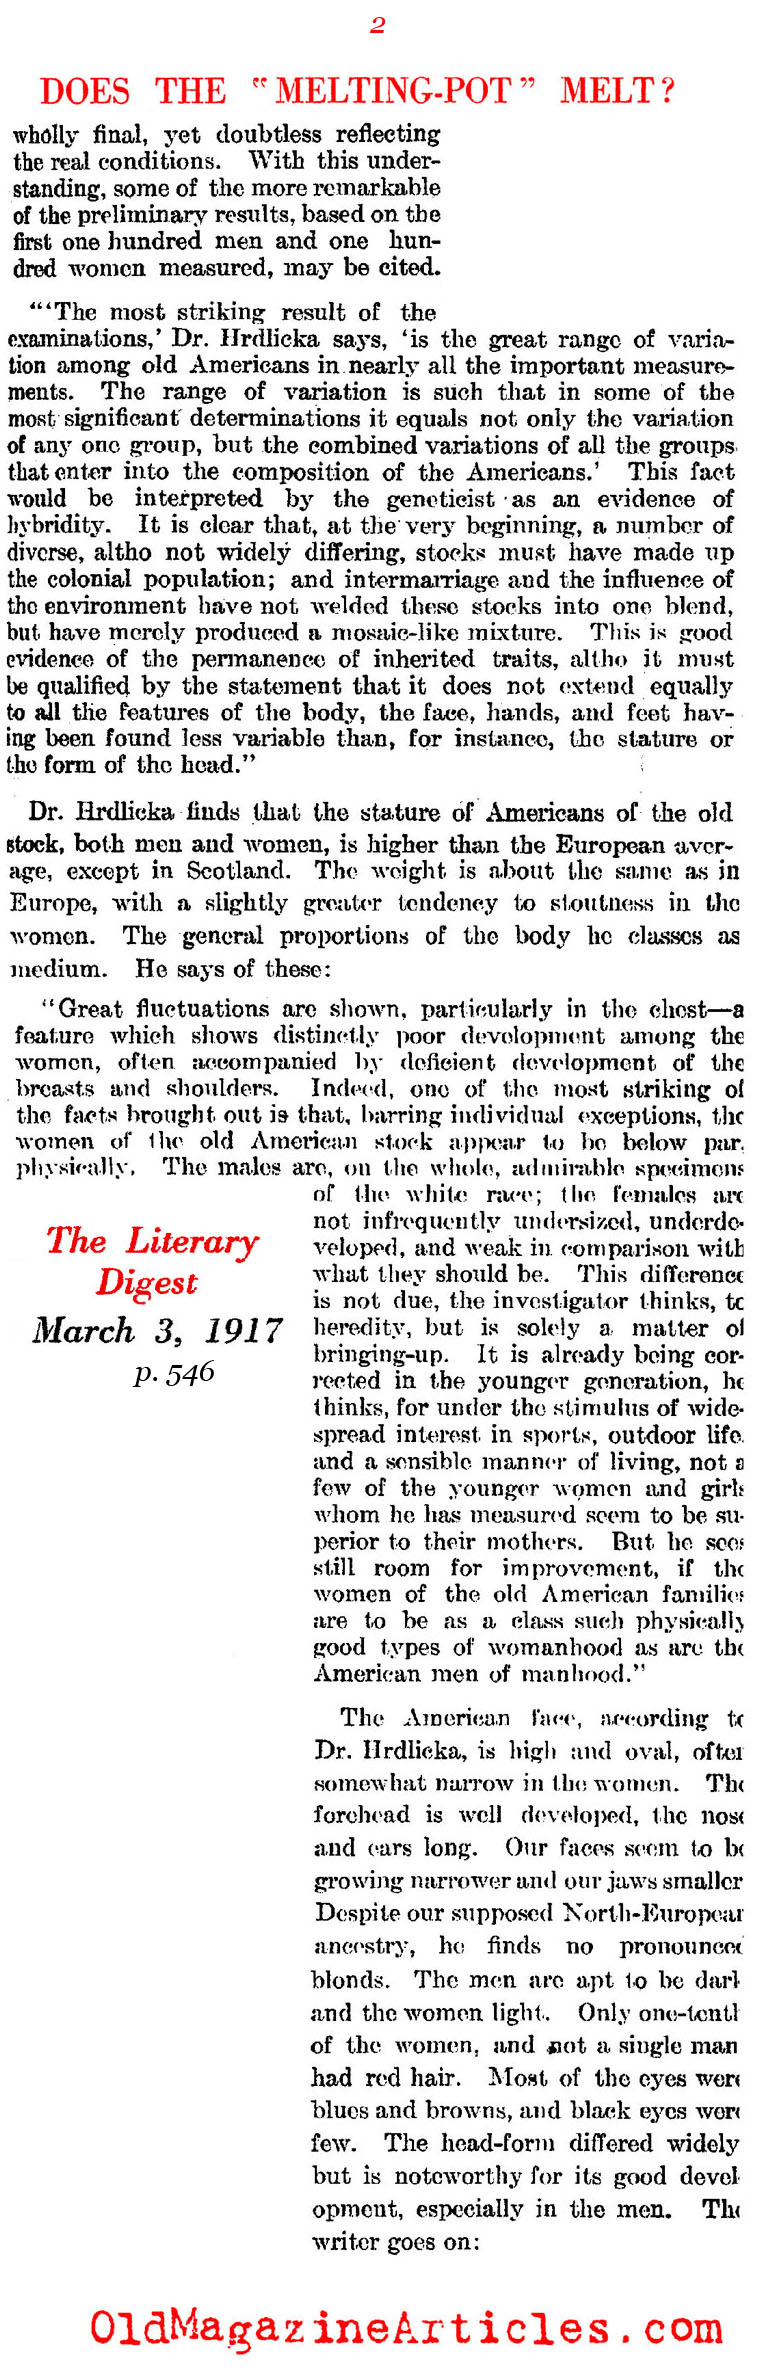 Junk Science and Immigration Policy (Literary Digest, 1917)